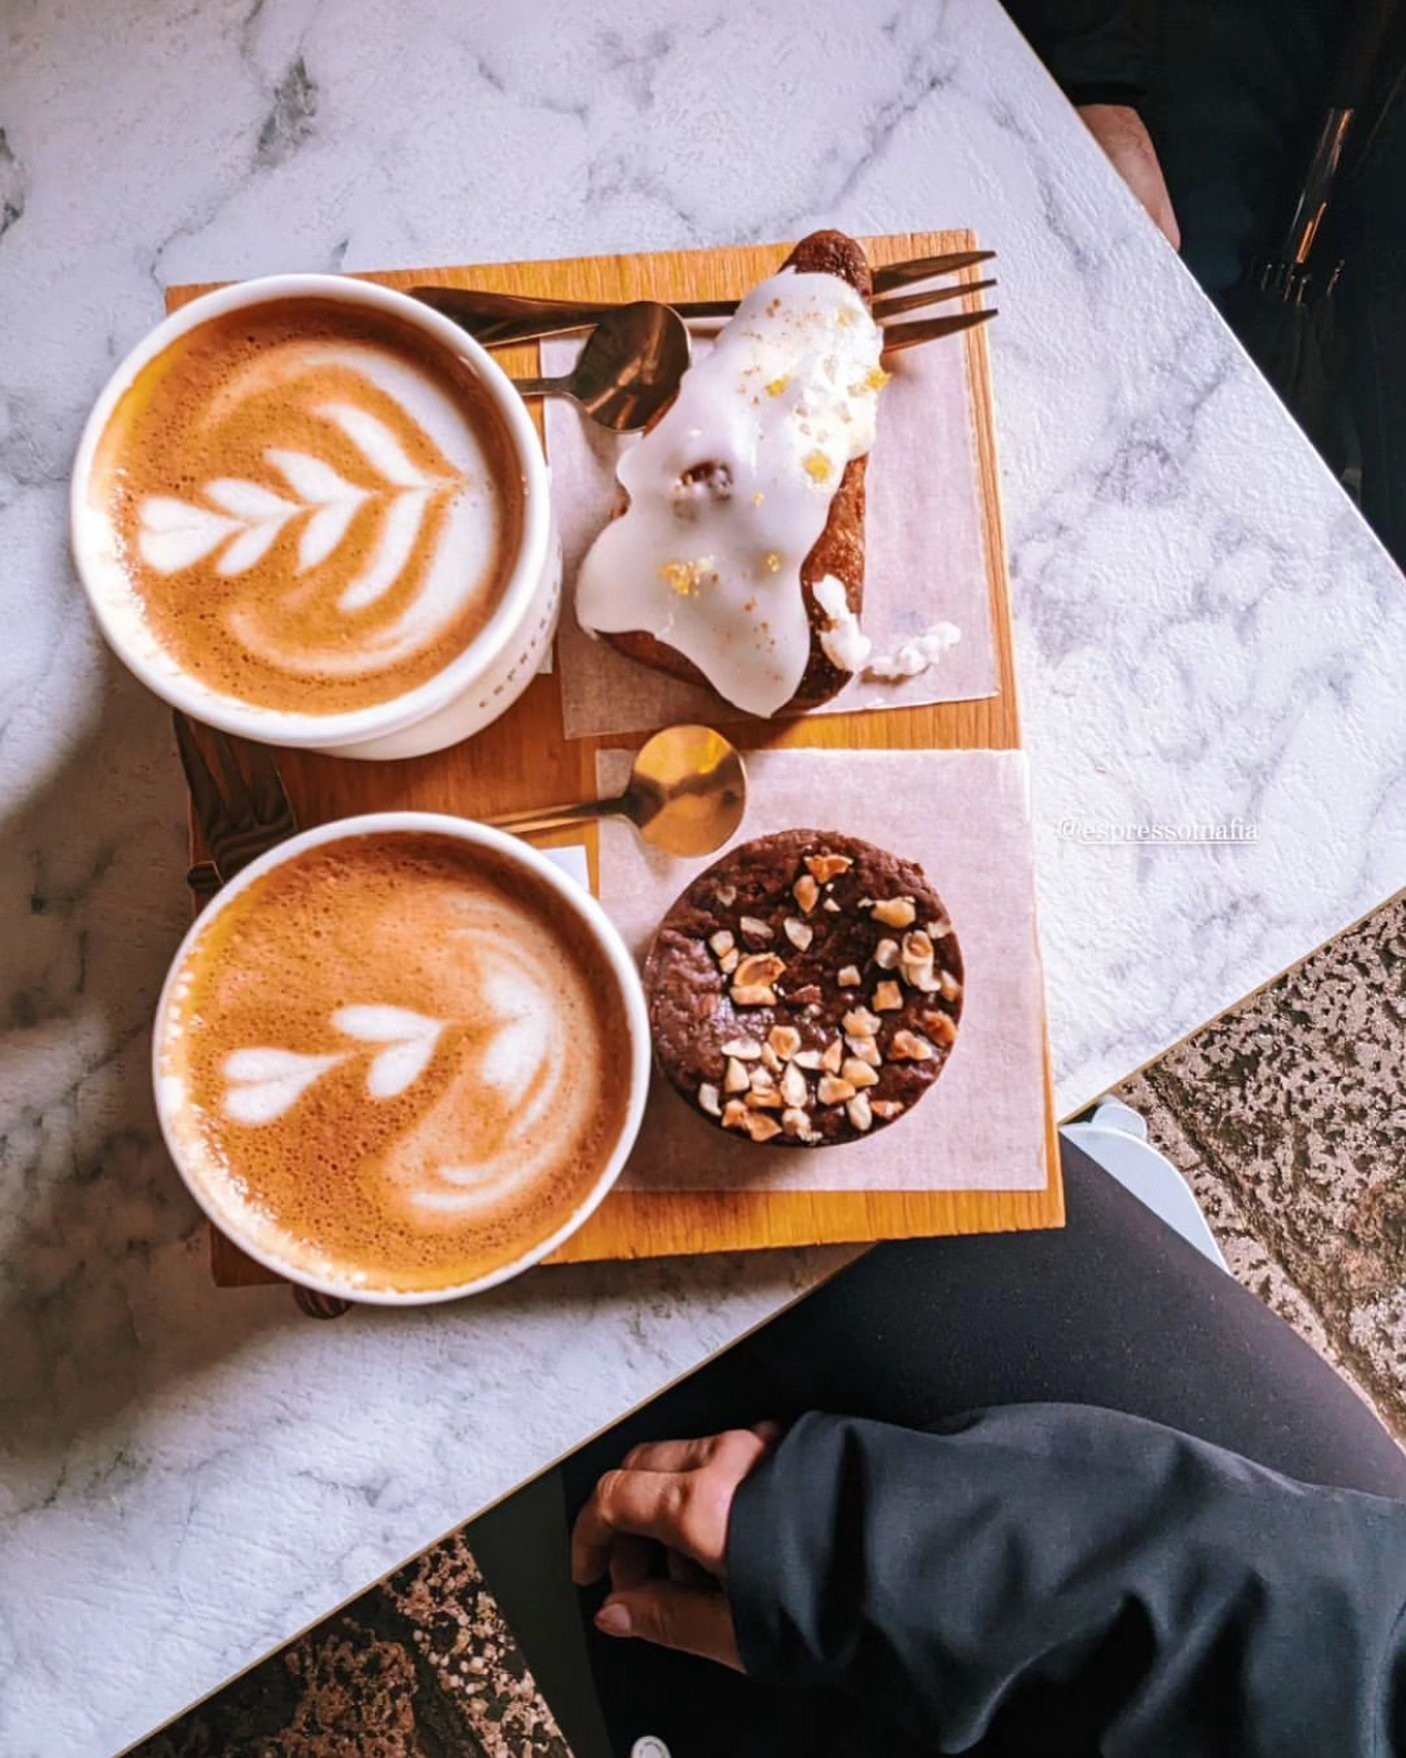 Well, this is how we want our Friday to look like 🤩 

Cakes to go with the coffees because we don&rsquo;t want them to get lonely 😩 🤤 

B&eacute;, aix&iacute; volem que quedi el nostre divendres 🤩

Pastissos per acompanyar els caf&egrave;s perqu&